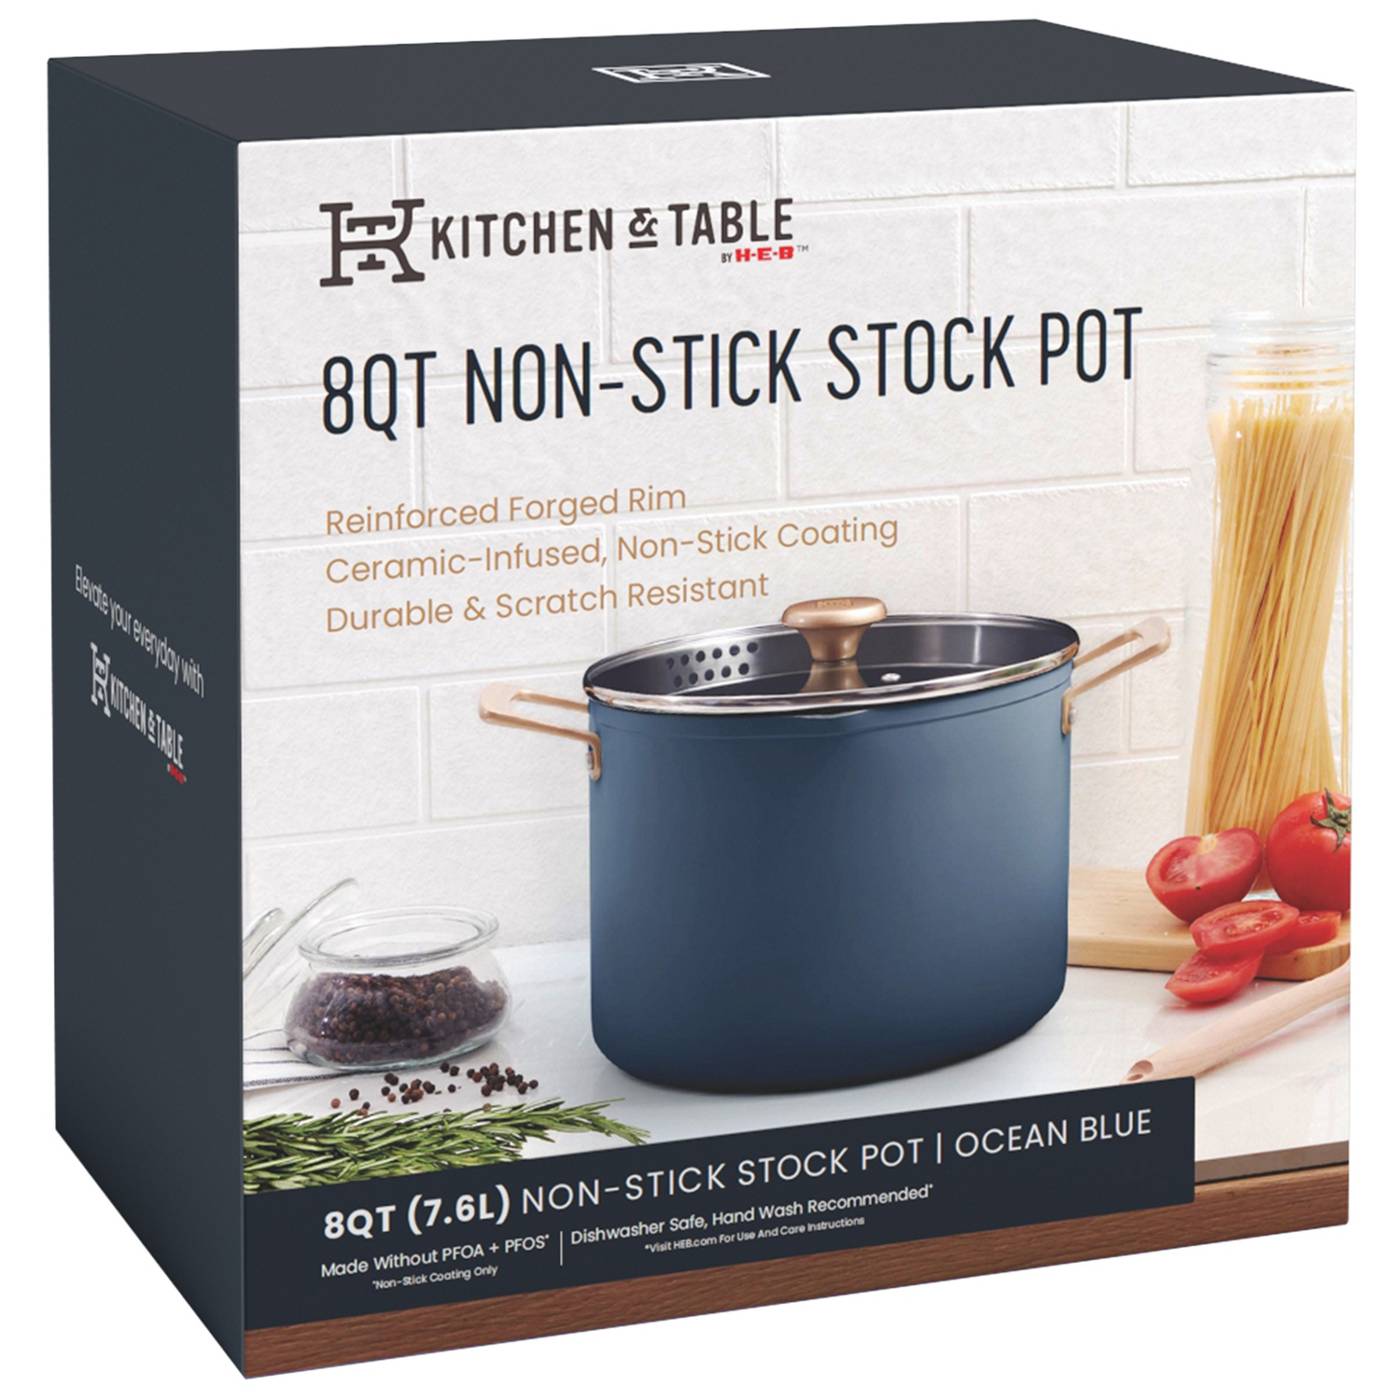 Kitchen & Table by H-E-B Non-Stick Stock Pot - Ocean Blue; image 2 of 5